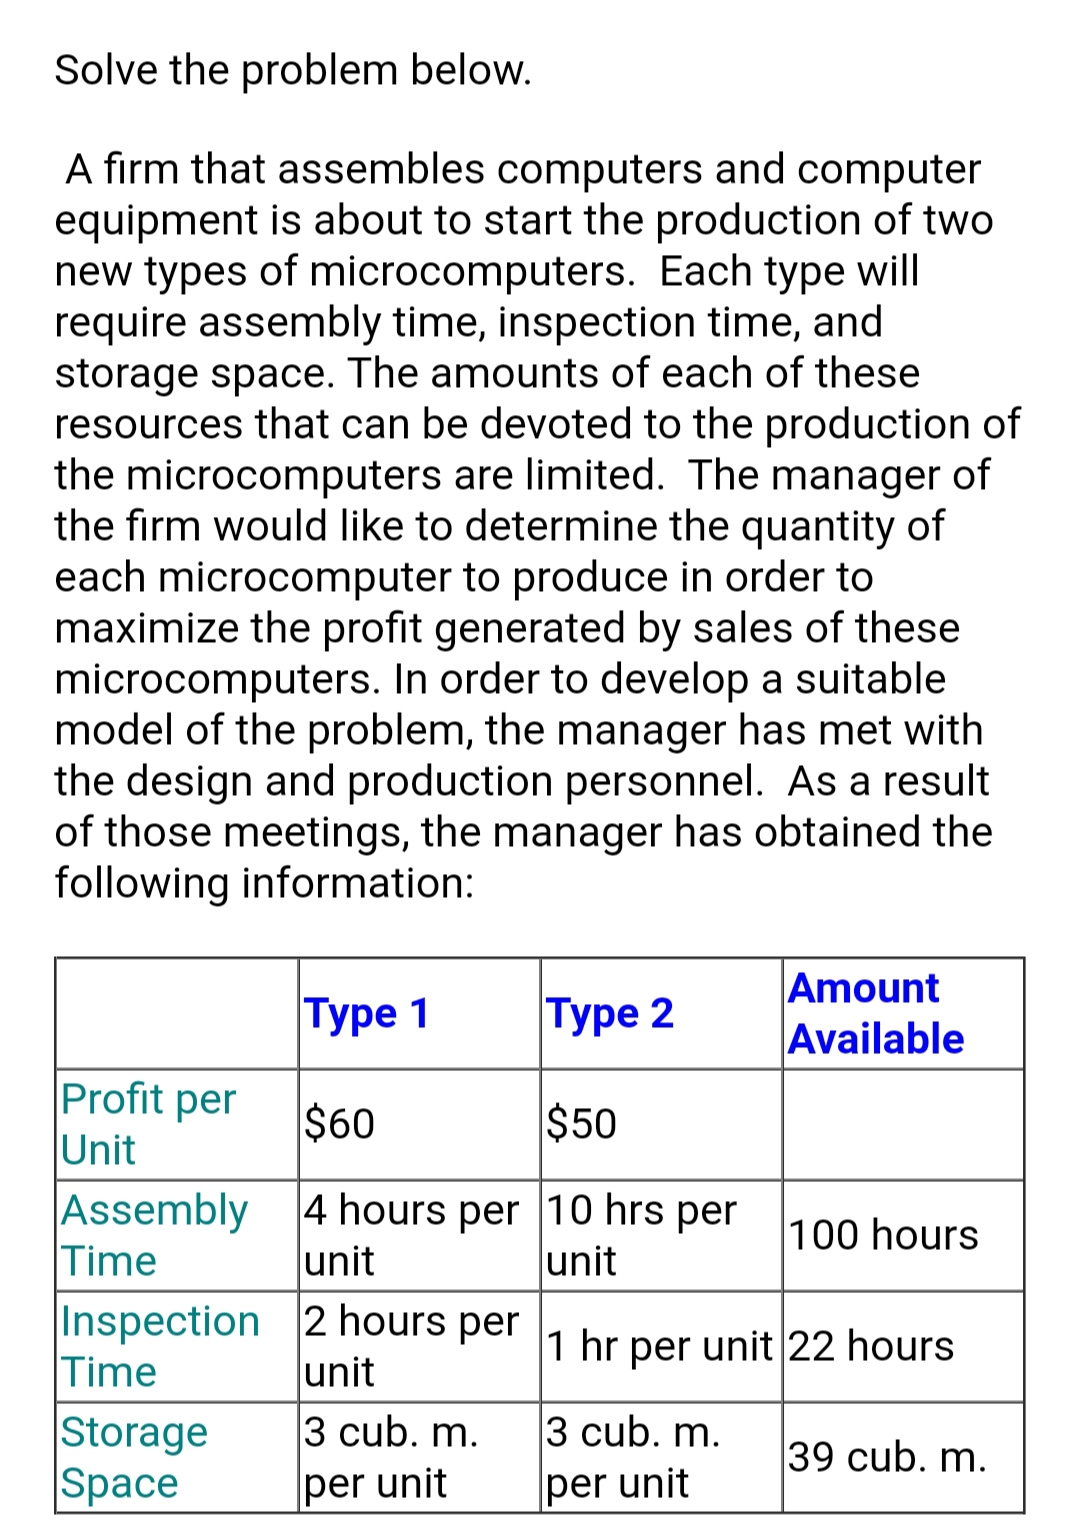 Solve the problem below.
A firm that assembles computers and computer
equipment is about to start the production of two
new types of microcomputers. Each type will
require assembly time, inspection time, and
storage space. The amounts of each of these
resources that can be devoted to the production of
the microcomputers are limited. The manager of
the firm would like to determine the quantity of
each microcomputer to produce in order to
maximize the profit generated by sales of these
microcomputers. In order to develop a suitable
model of the problem, the manager has met with
the design and production personnel. As a result
of those meetings, the manager has obtained the
following information:
|Туре 1
|Туре 2
Amount
Available
Profit per
Unit
$60
$50
Assembly
Time
4 hours per 10 hrs per
unit
100 hours
unit
Inspection 2 hours per
Time
Storage
Space
1 hr per unit 22 hours
unit
3 cub. m.
3 cub. m.
39 cub. m.
per unit
per unit
